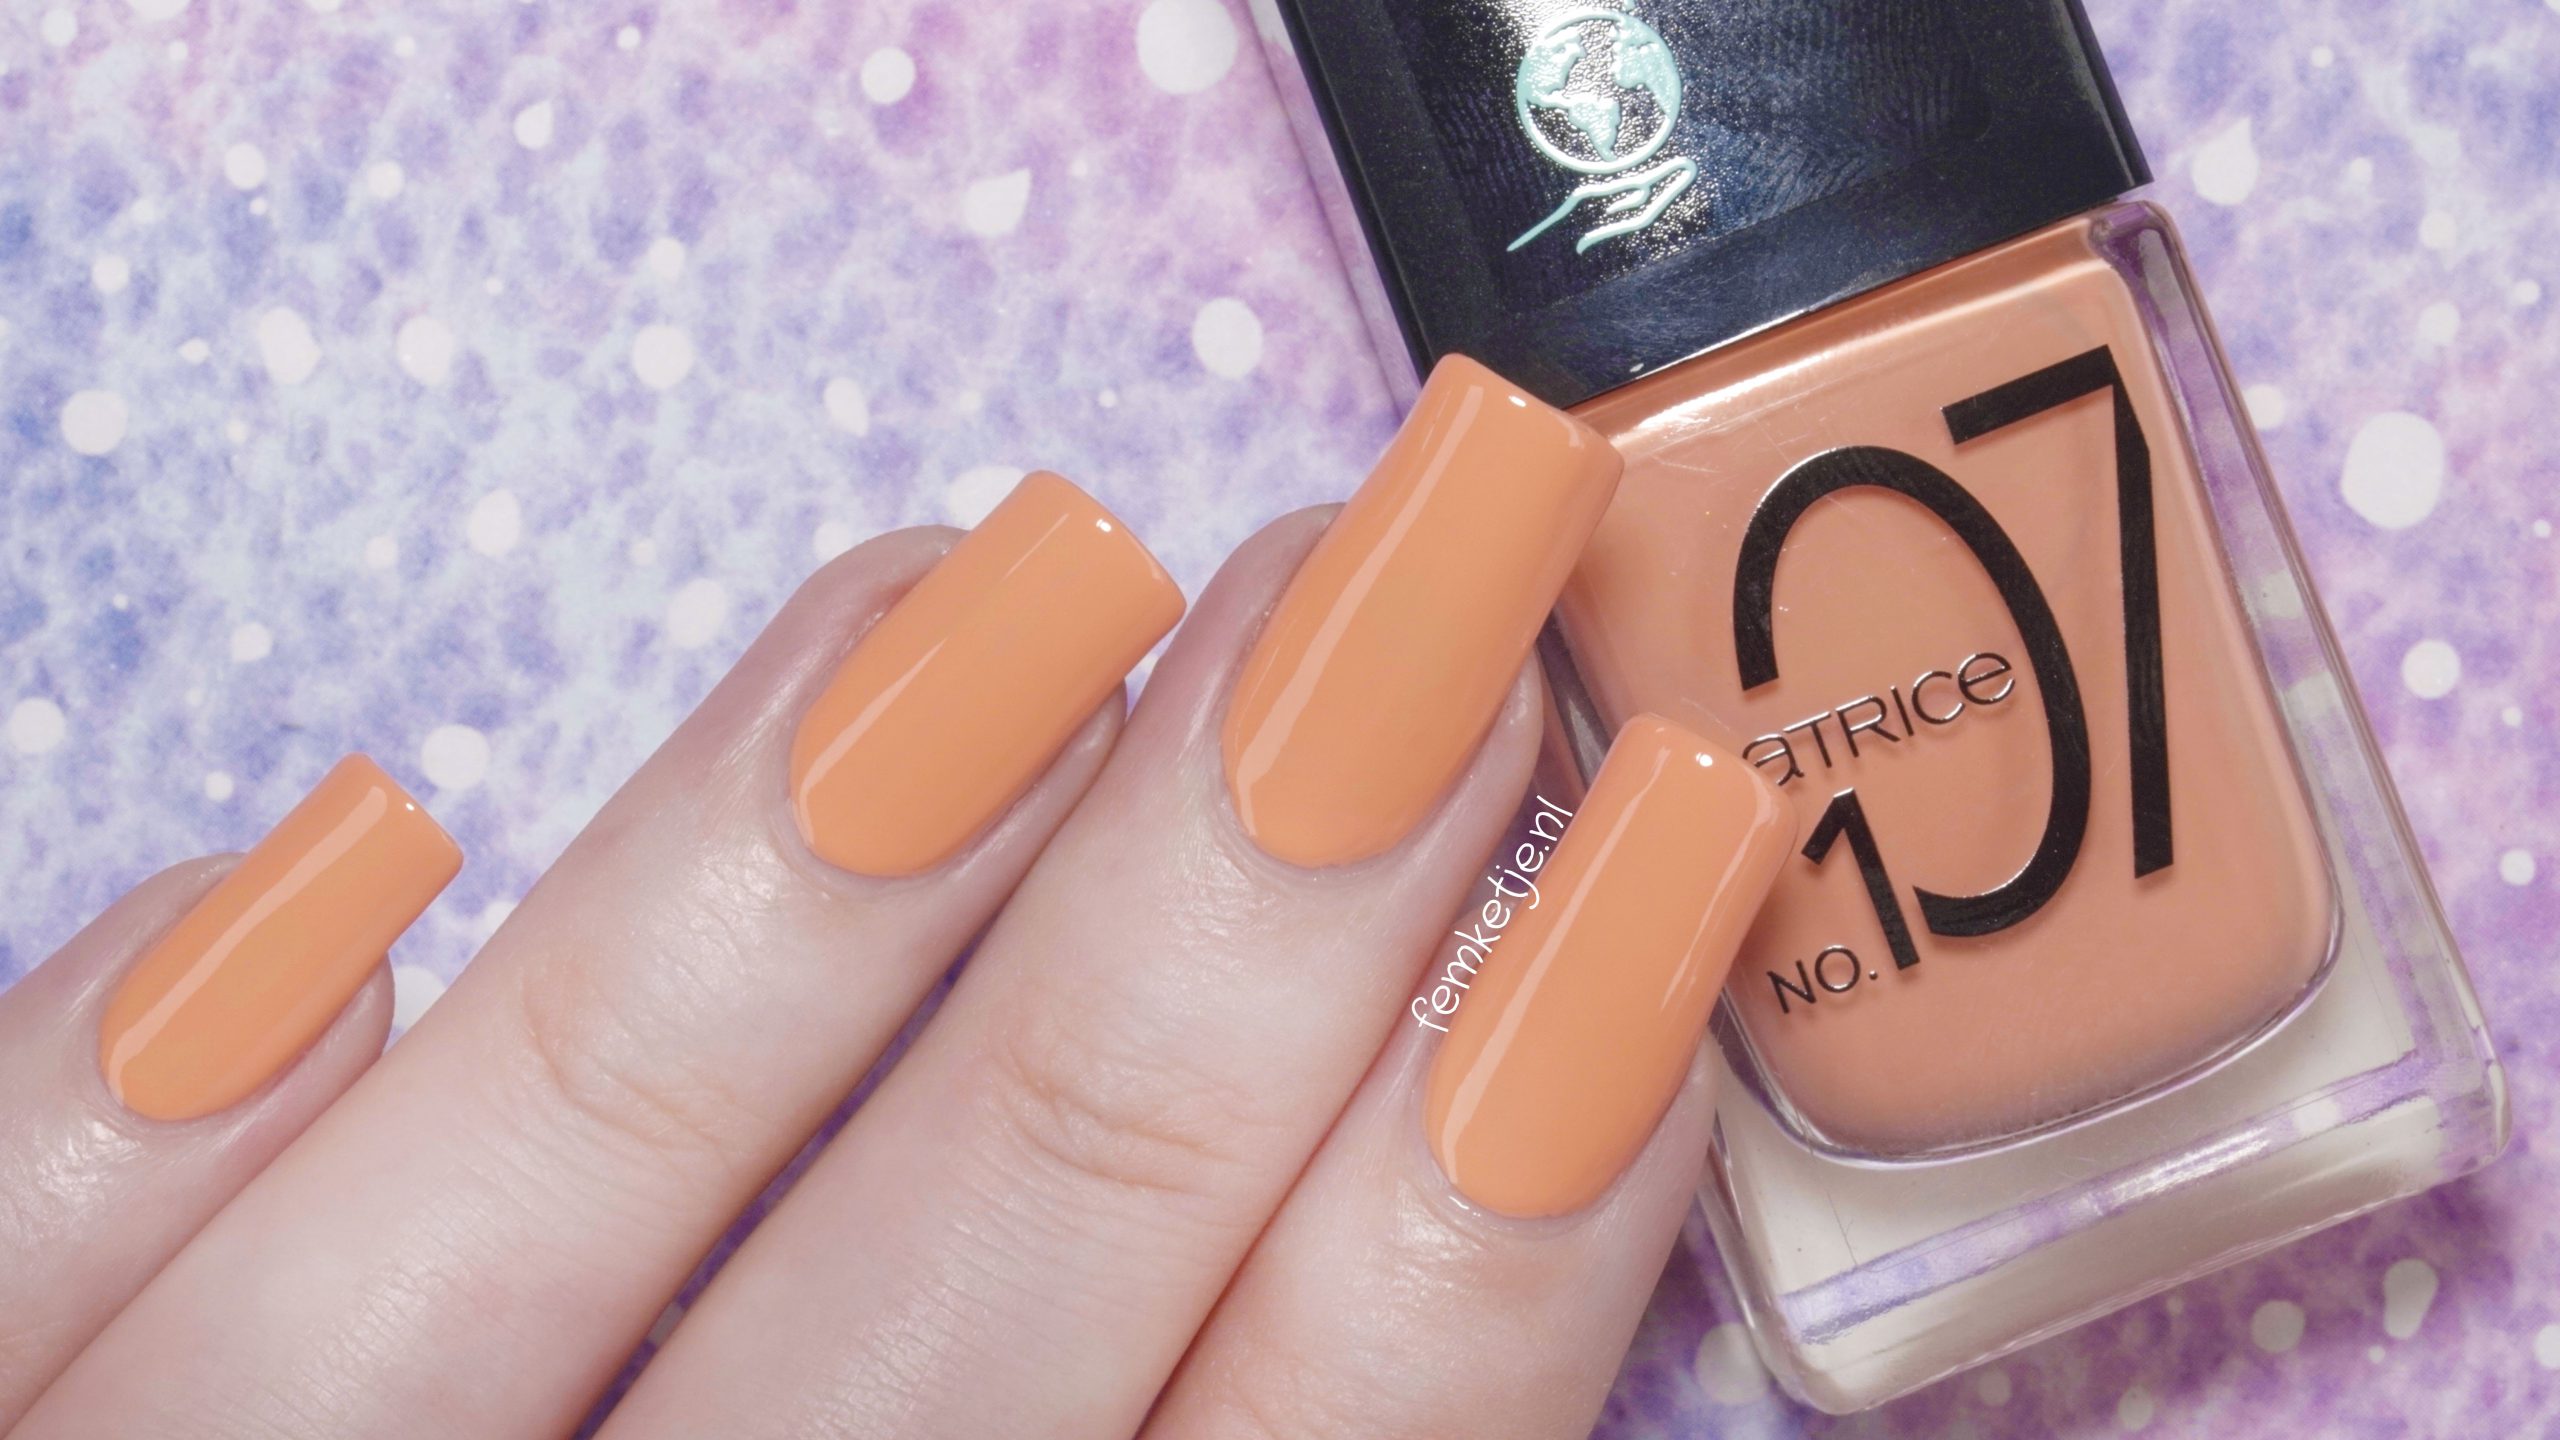 Color Club Poptastic 2015 Pastel Neons Collection Swatches & Review | Peach  nails, Nails, Nail colors